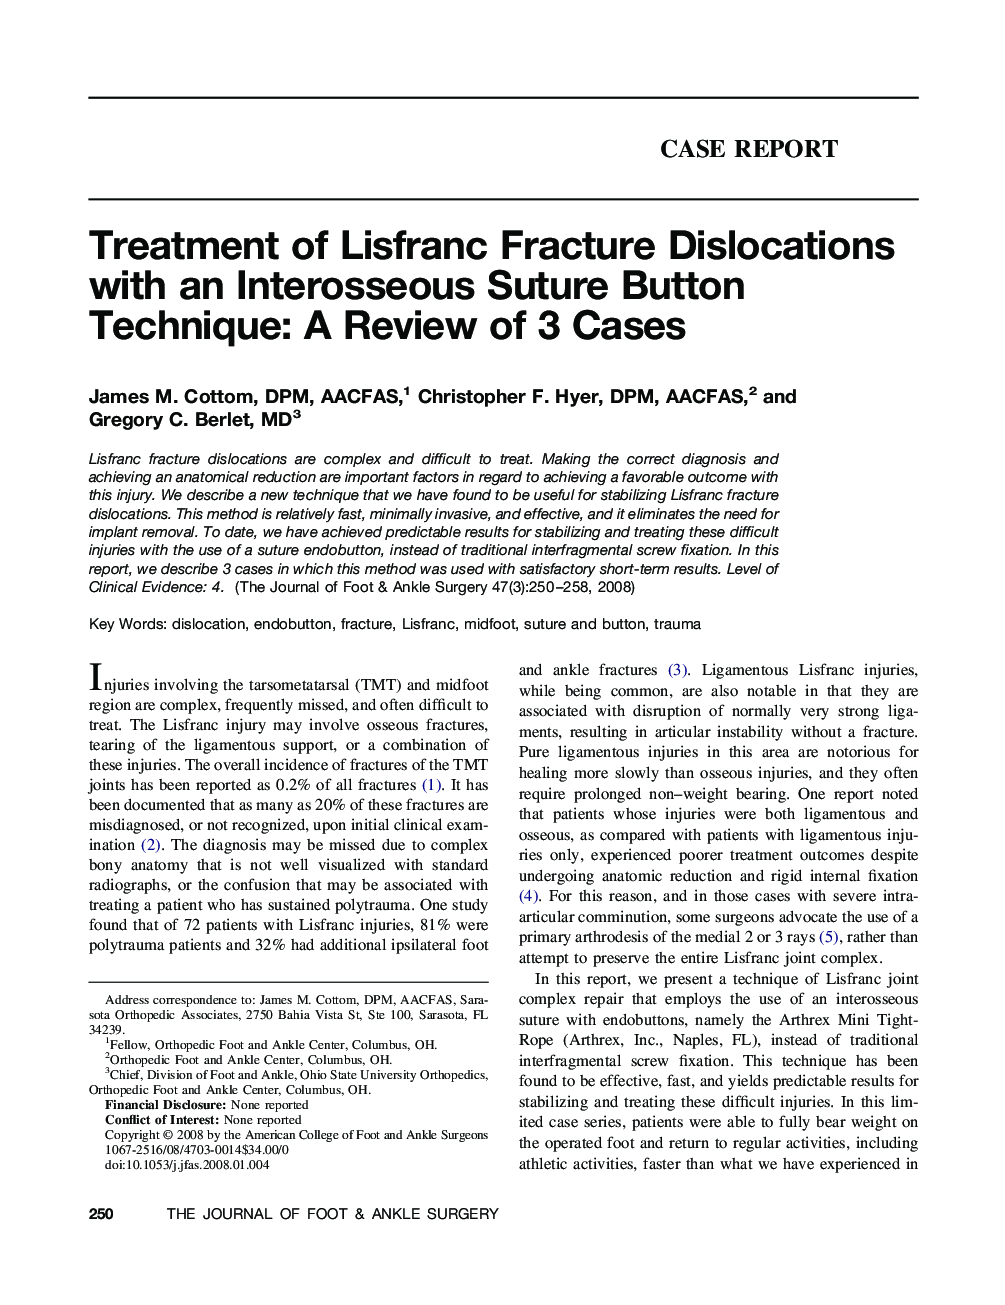 Treatment of Lisfranc Fracture Dislocations with an Interosseous Suture Button Technique: A Review of 3 Cases 